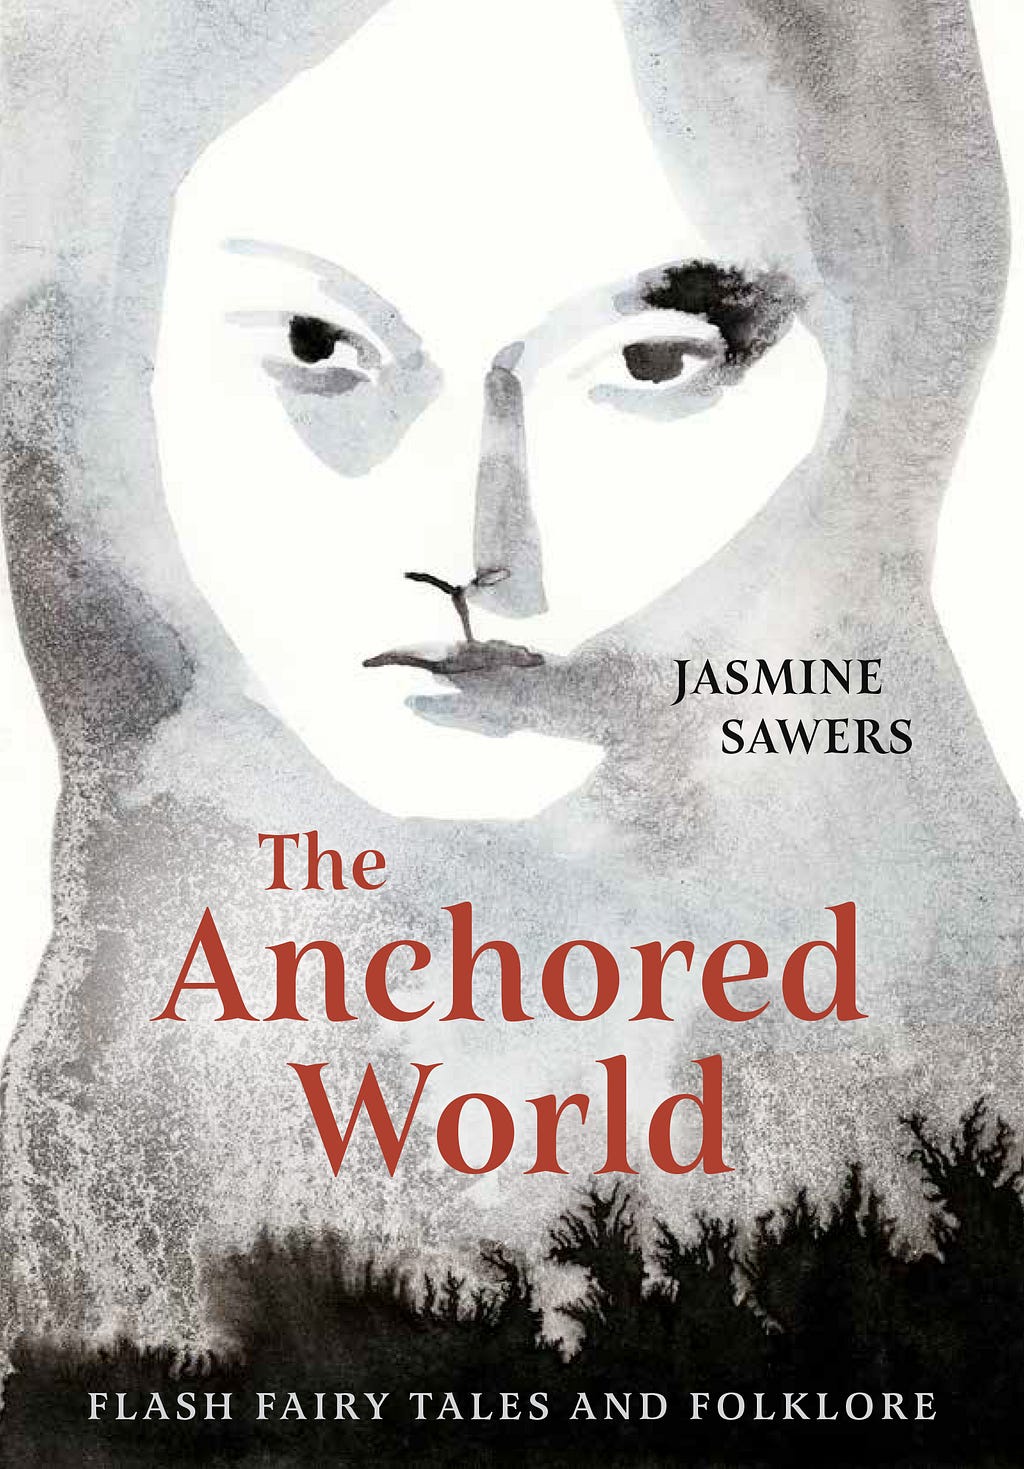 The book cover for The Anchored World: Flash Fairy Tales and Folklore by Jasmine Sawers, featuring a ghostlike image of a woman’s face.